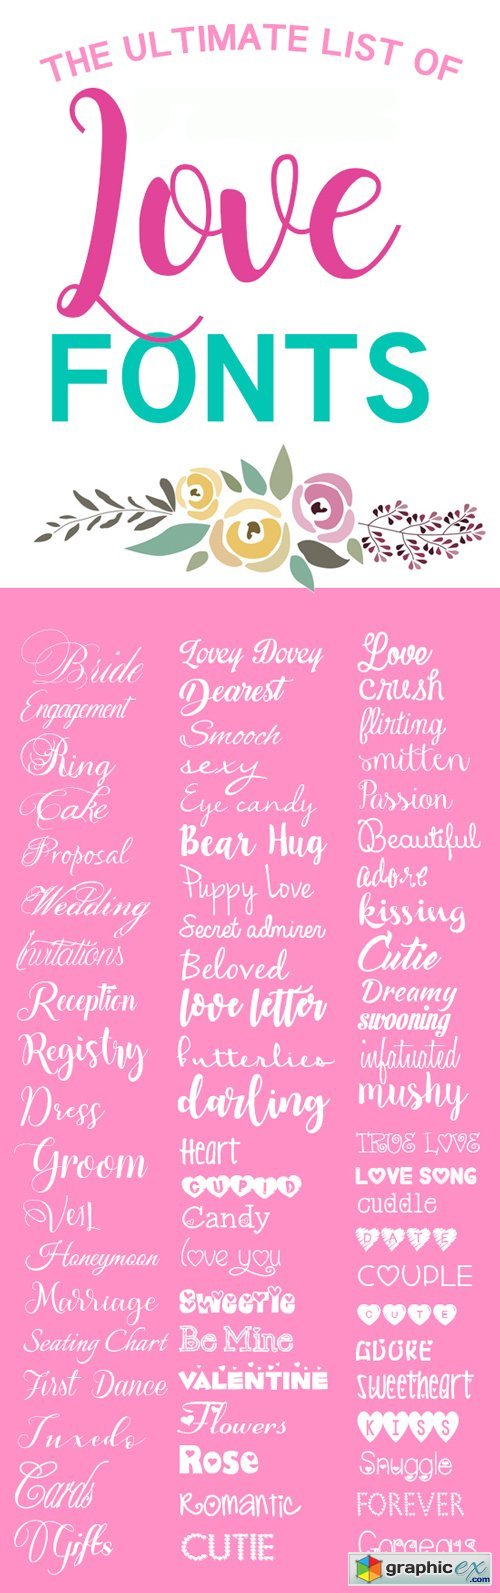 The Ultimate List Of Love Fonts